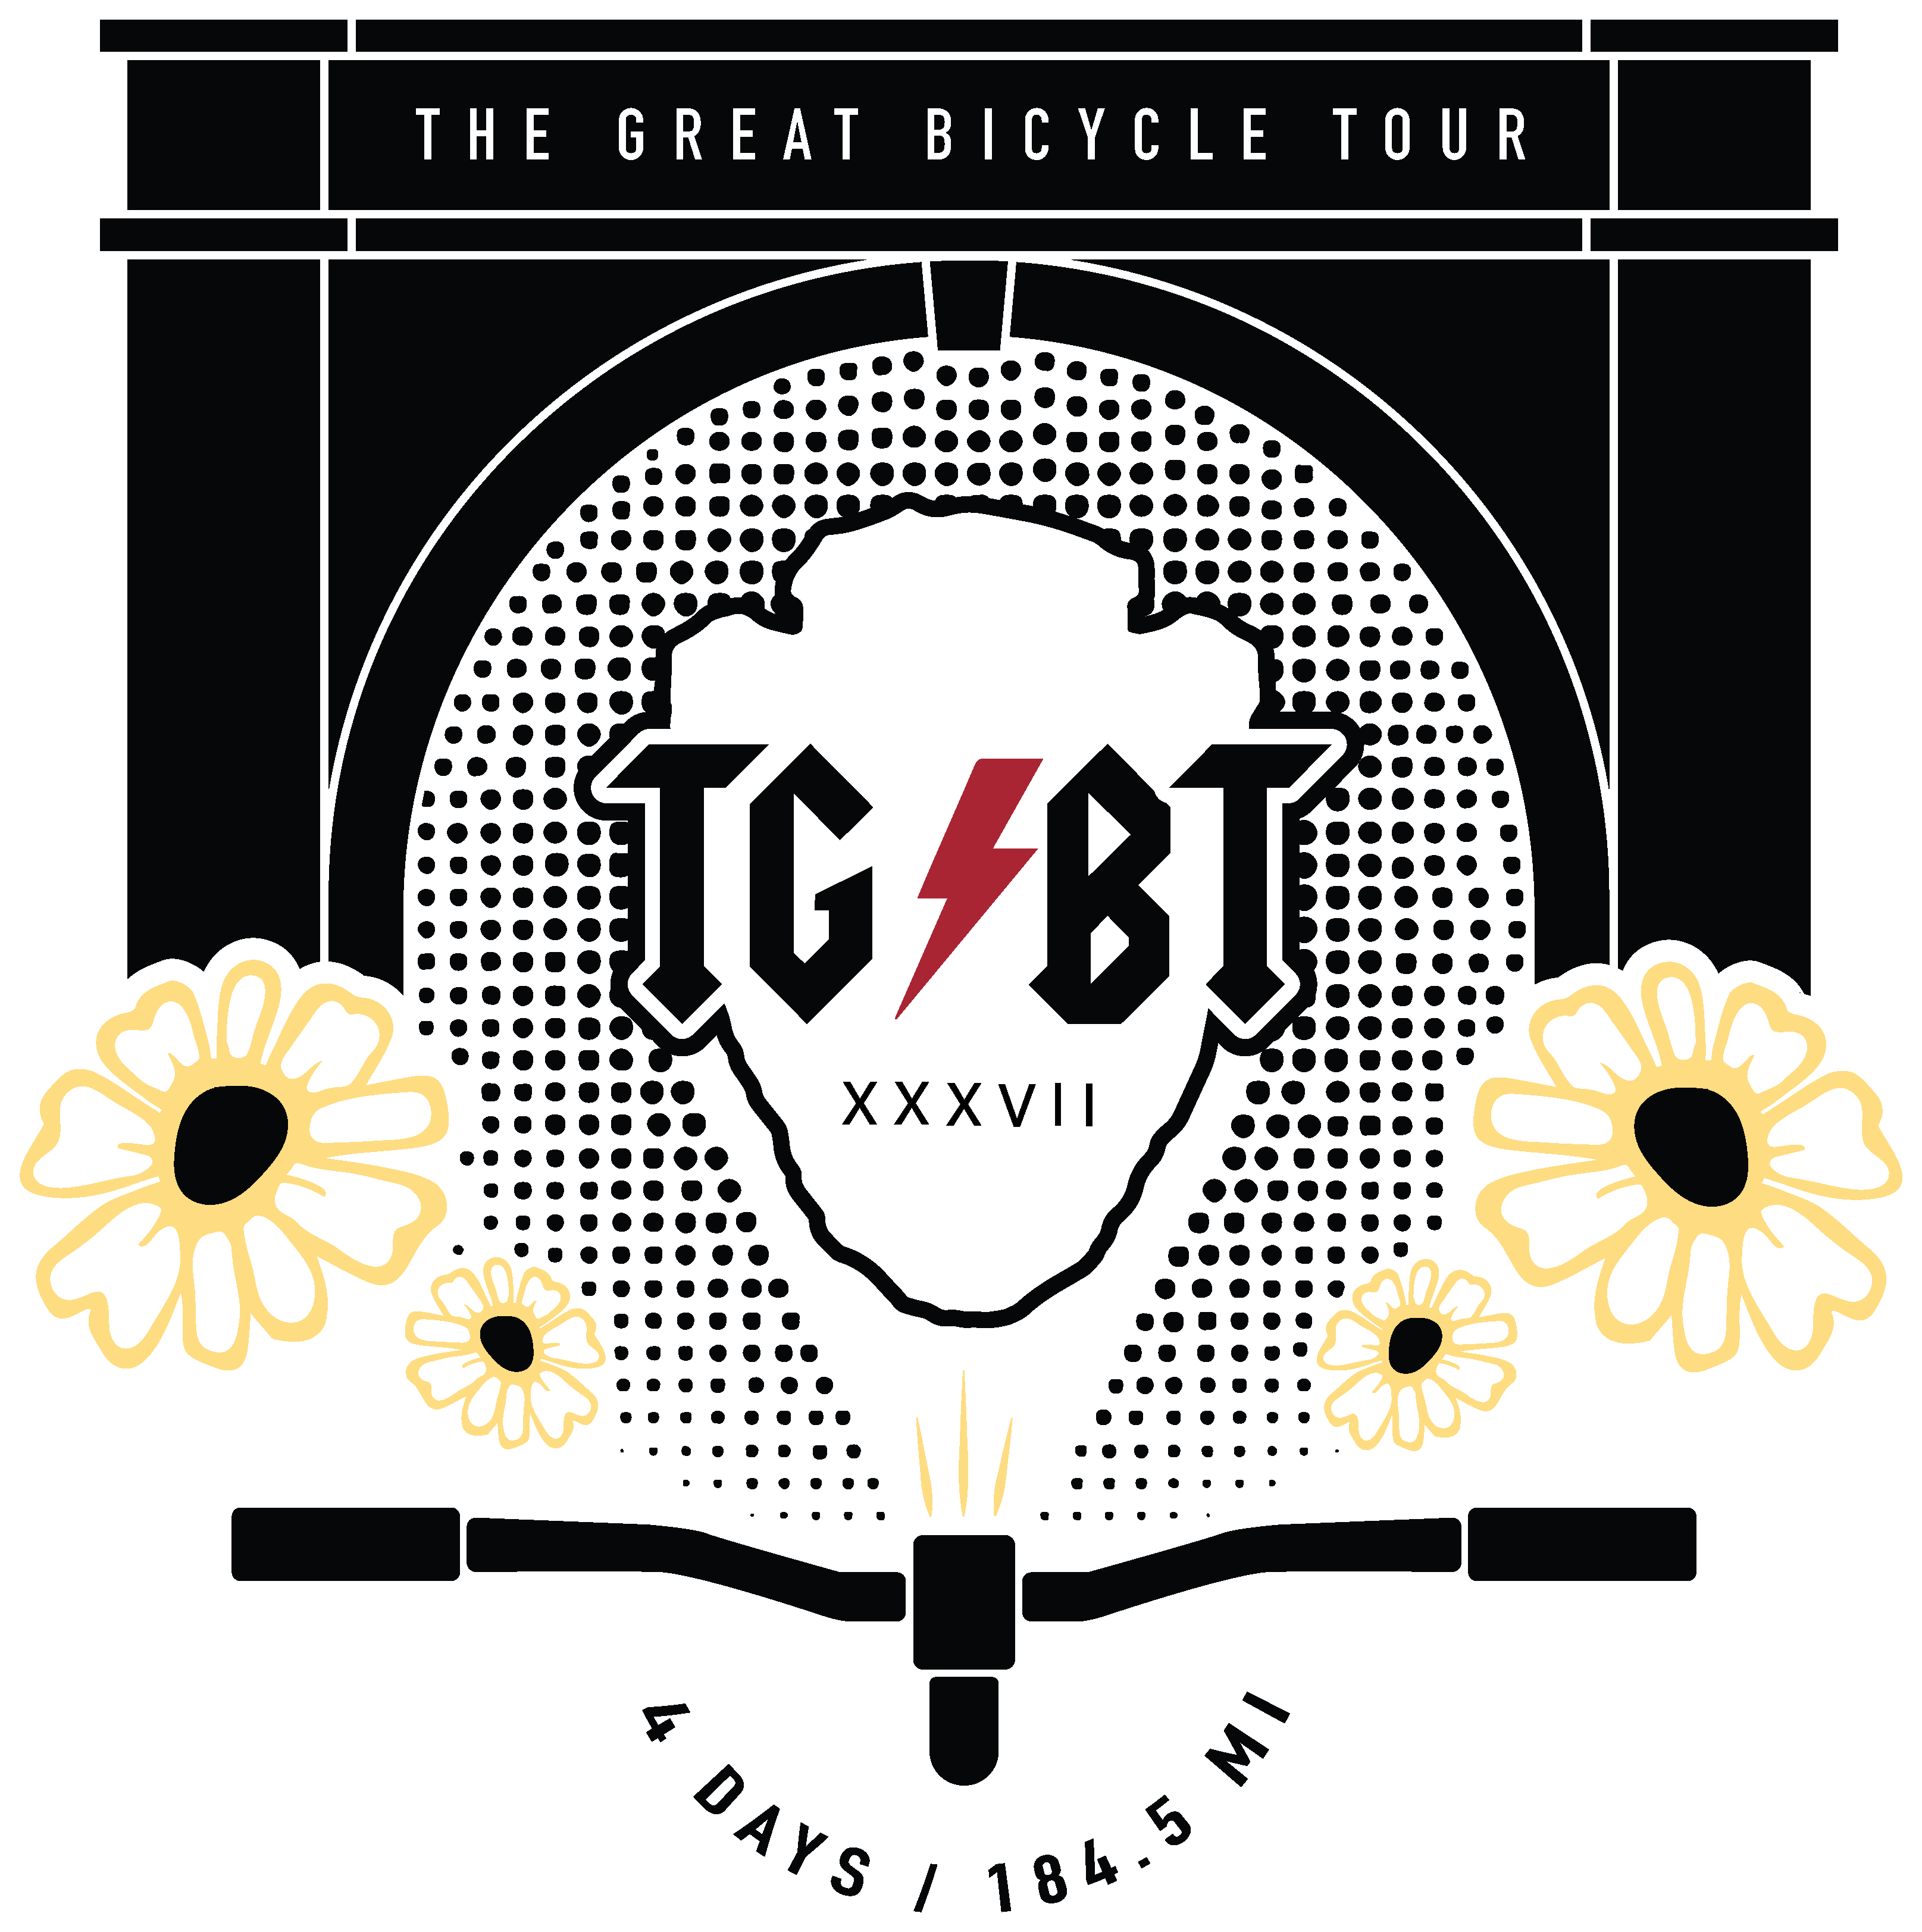 The Great Bicycle Tour